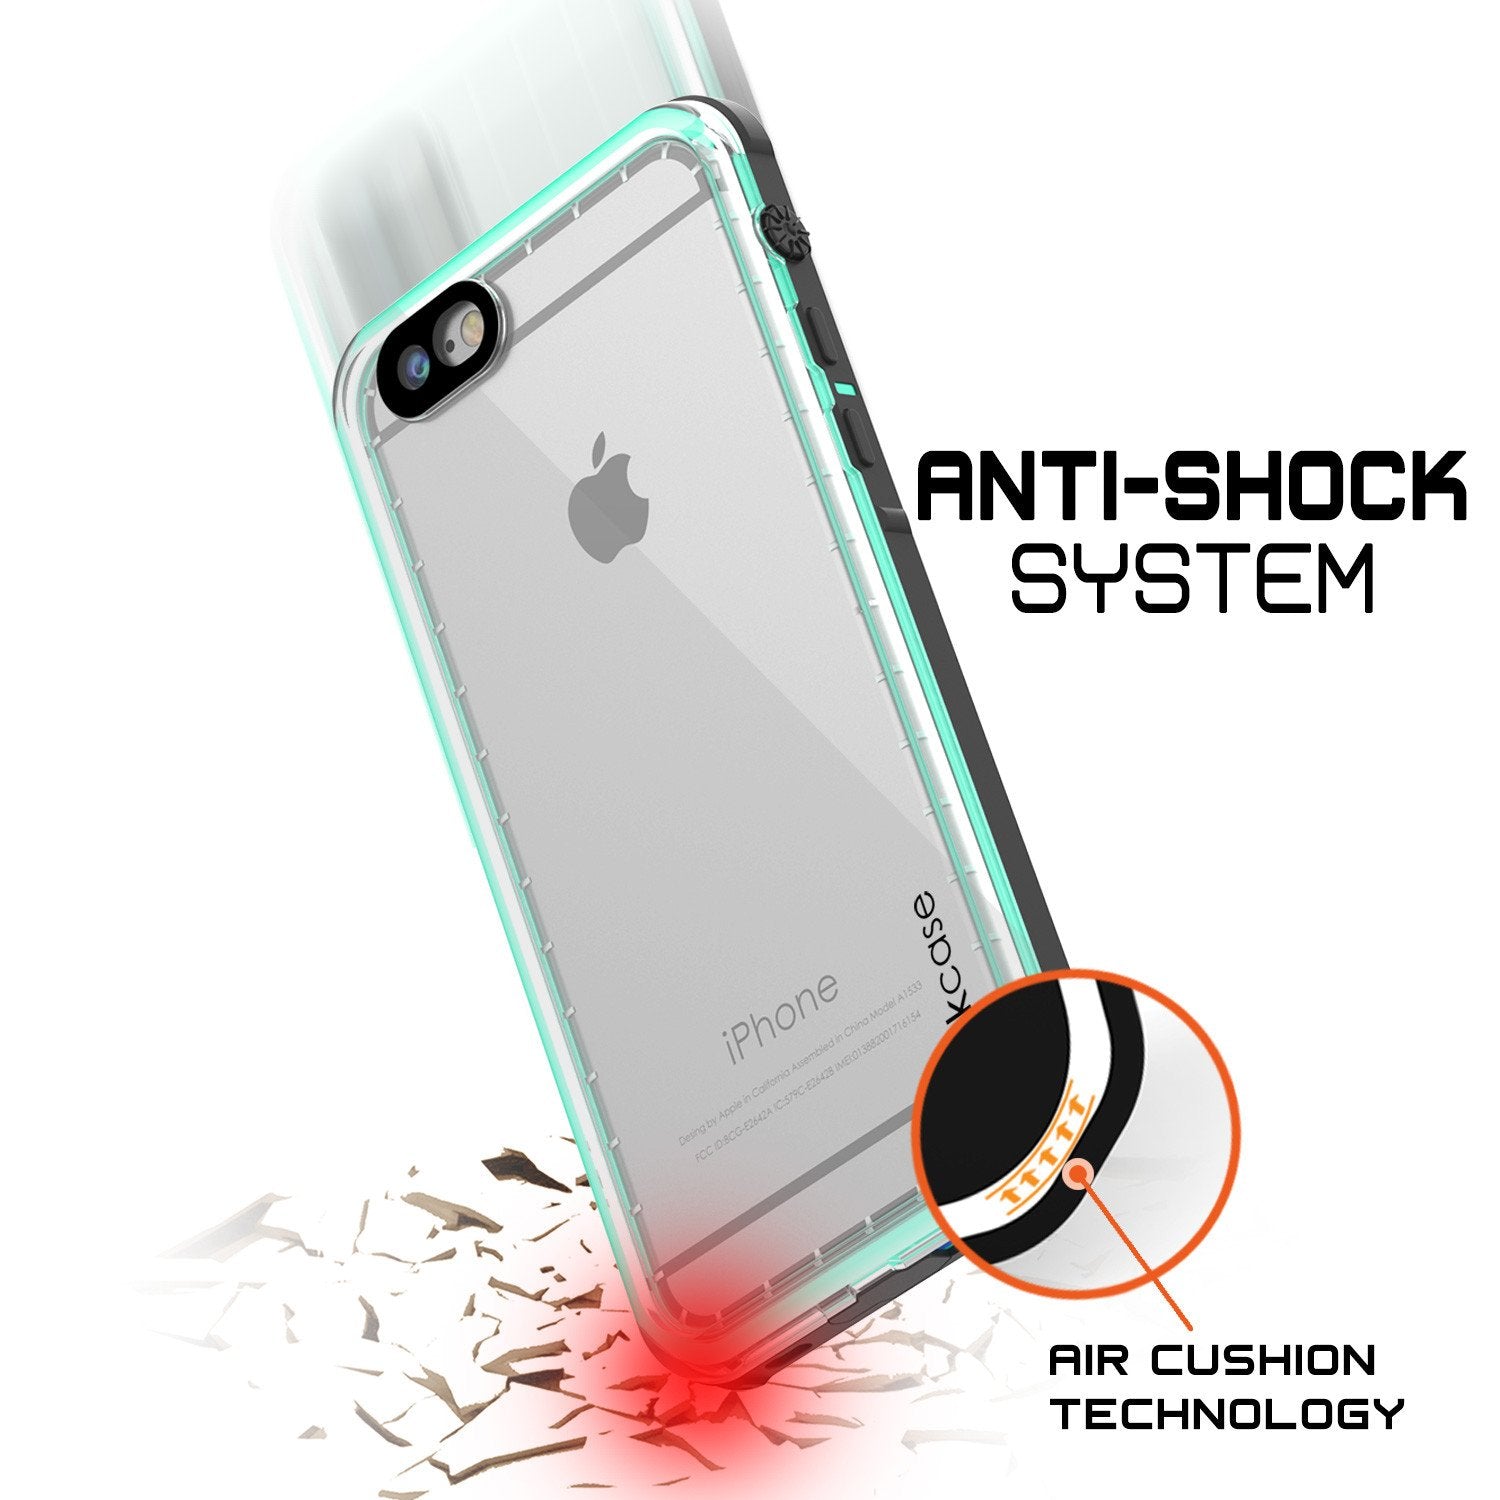 Apple iPhone 7 Waterproof Case, PUNKcase CRYSTAL Teal W/ Attached Screen Protector  | Warranty - PunkCase NZ